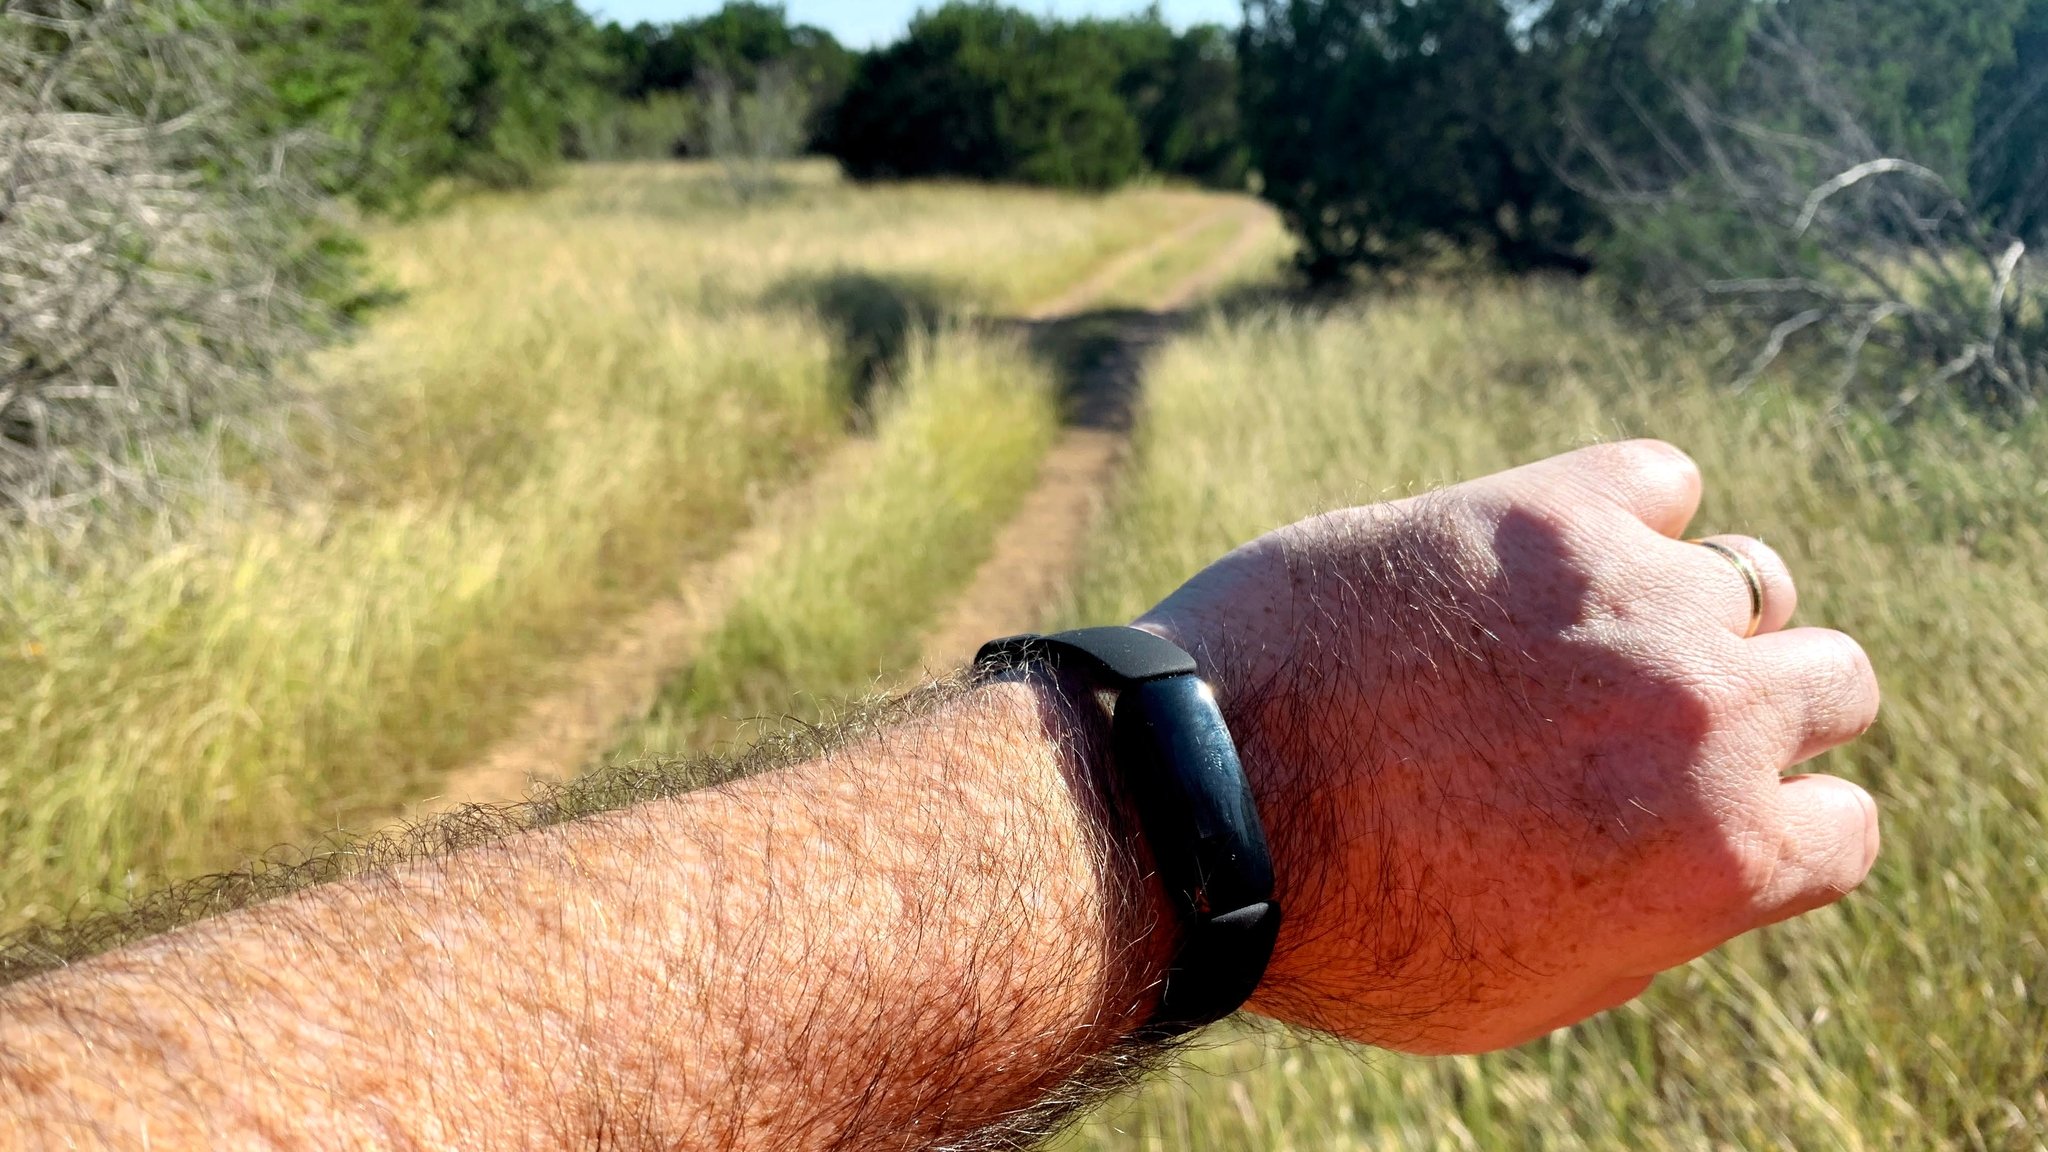 Fitbit Inspire 2 Review: The best beginner fitness tracker for